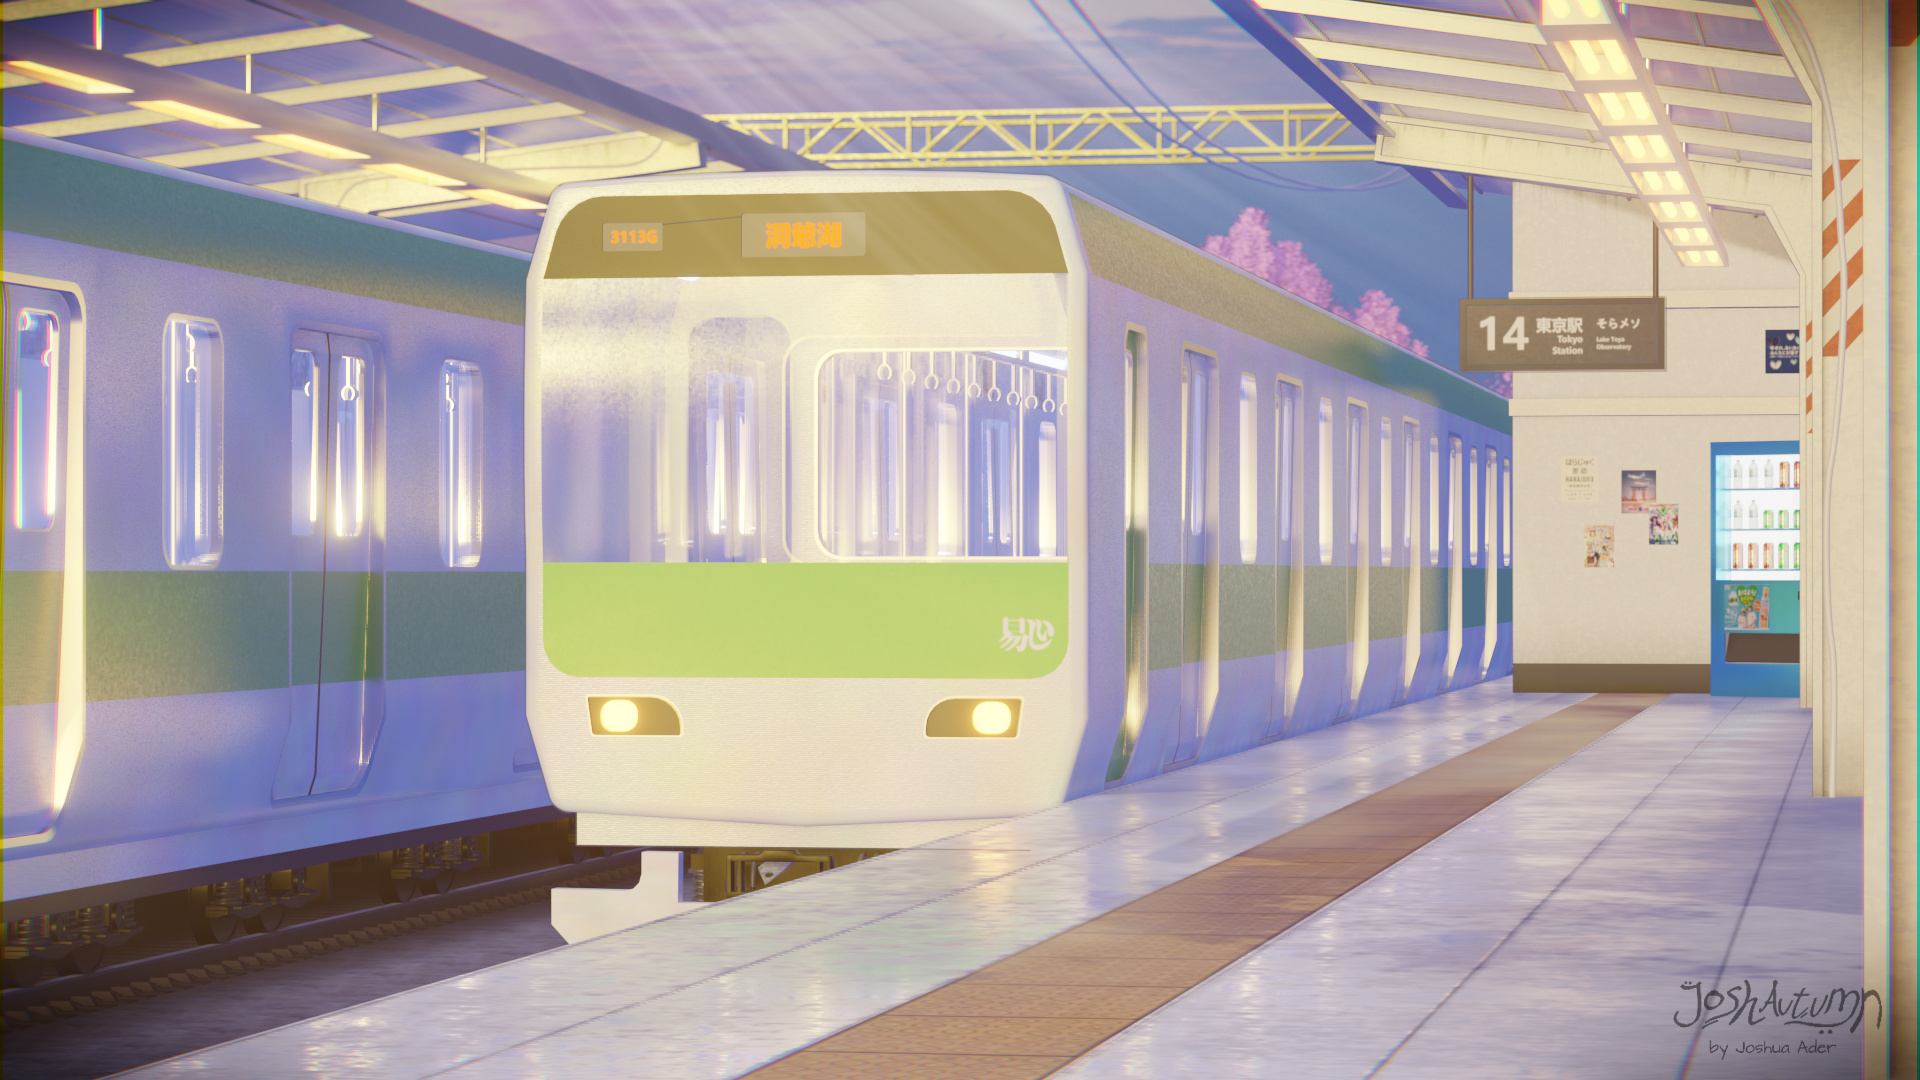 Train In A Station From An Anime Series Background Cgi Picture Background  Image And Wallpaper for Free Download